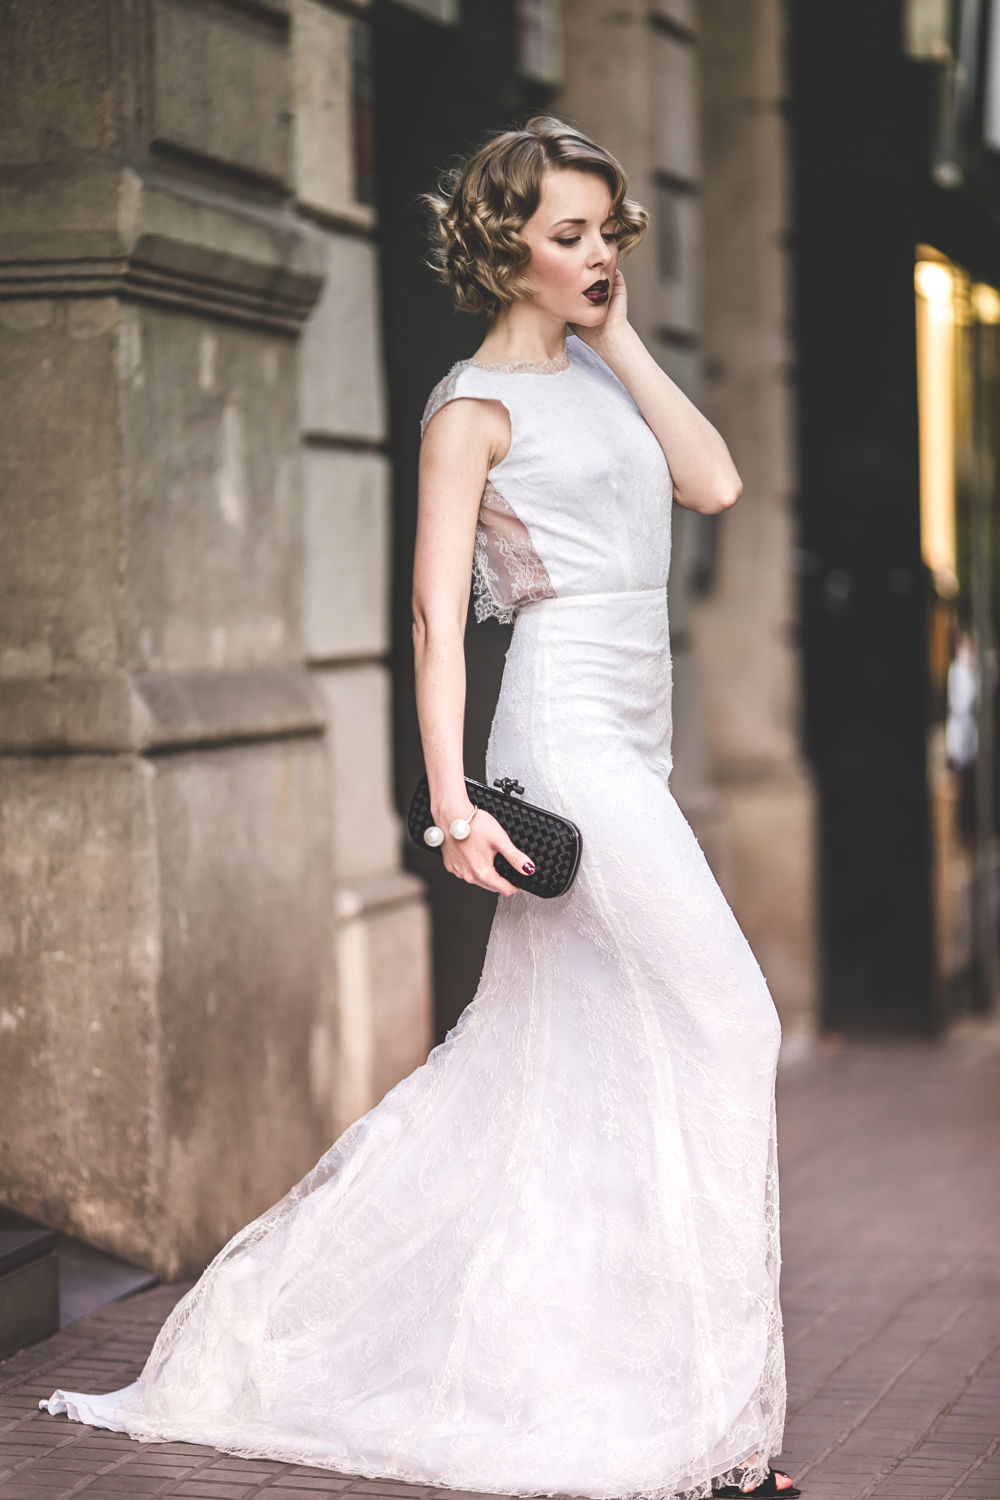 darya kamalova fashion blogger from thecablook in trip in Barcelona Spain with Pronovias 2015 wedding dresses collection catwalk wearing uel camilo white gown bottega veneta knot clutch and black lips-1896